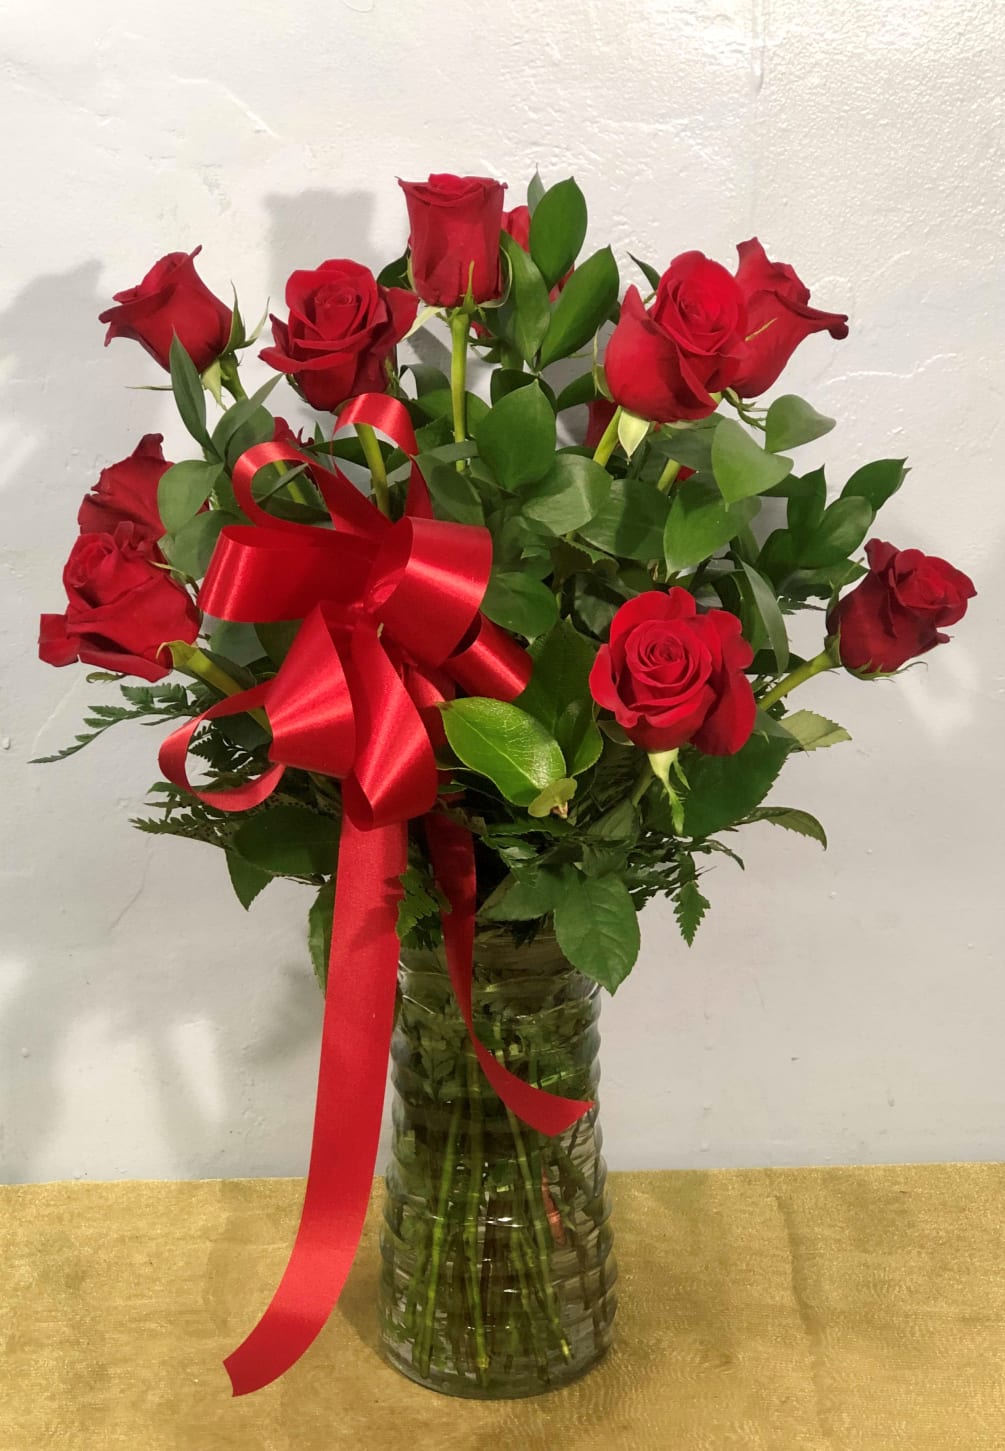 These dozen red roses are a classic hit! The perfect romantic gift